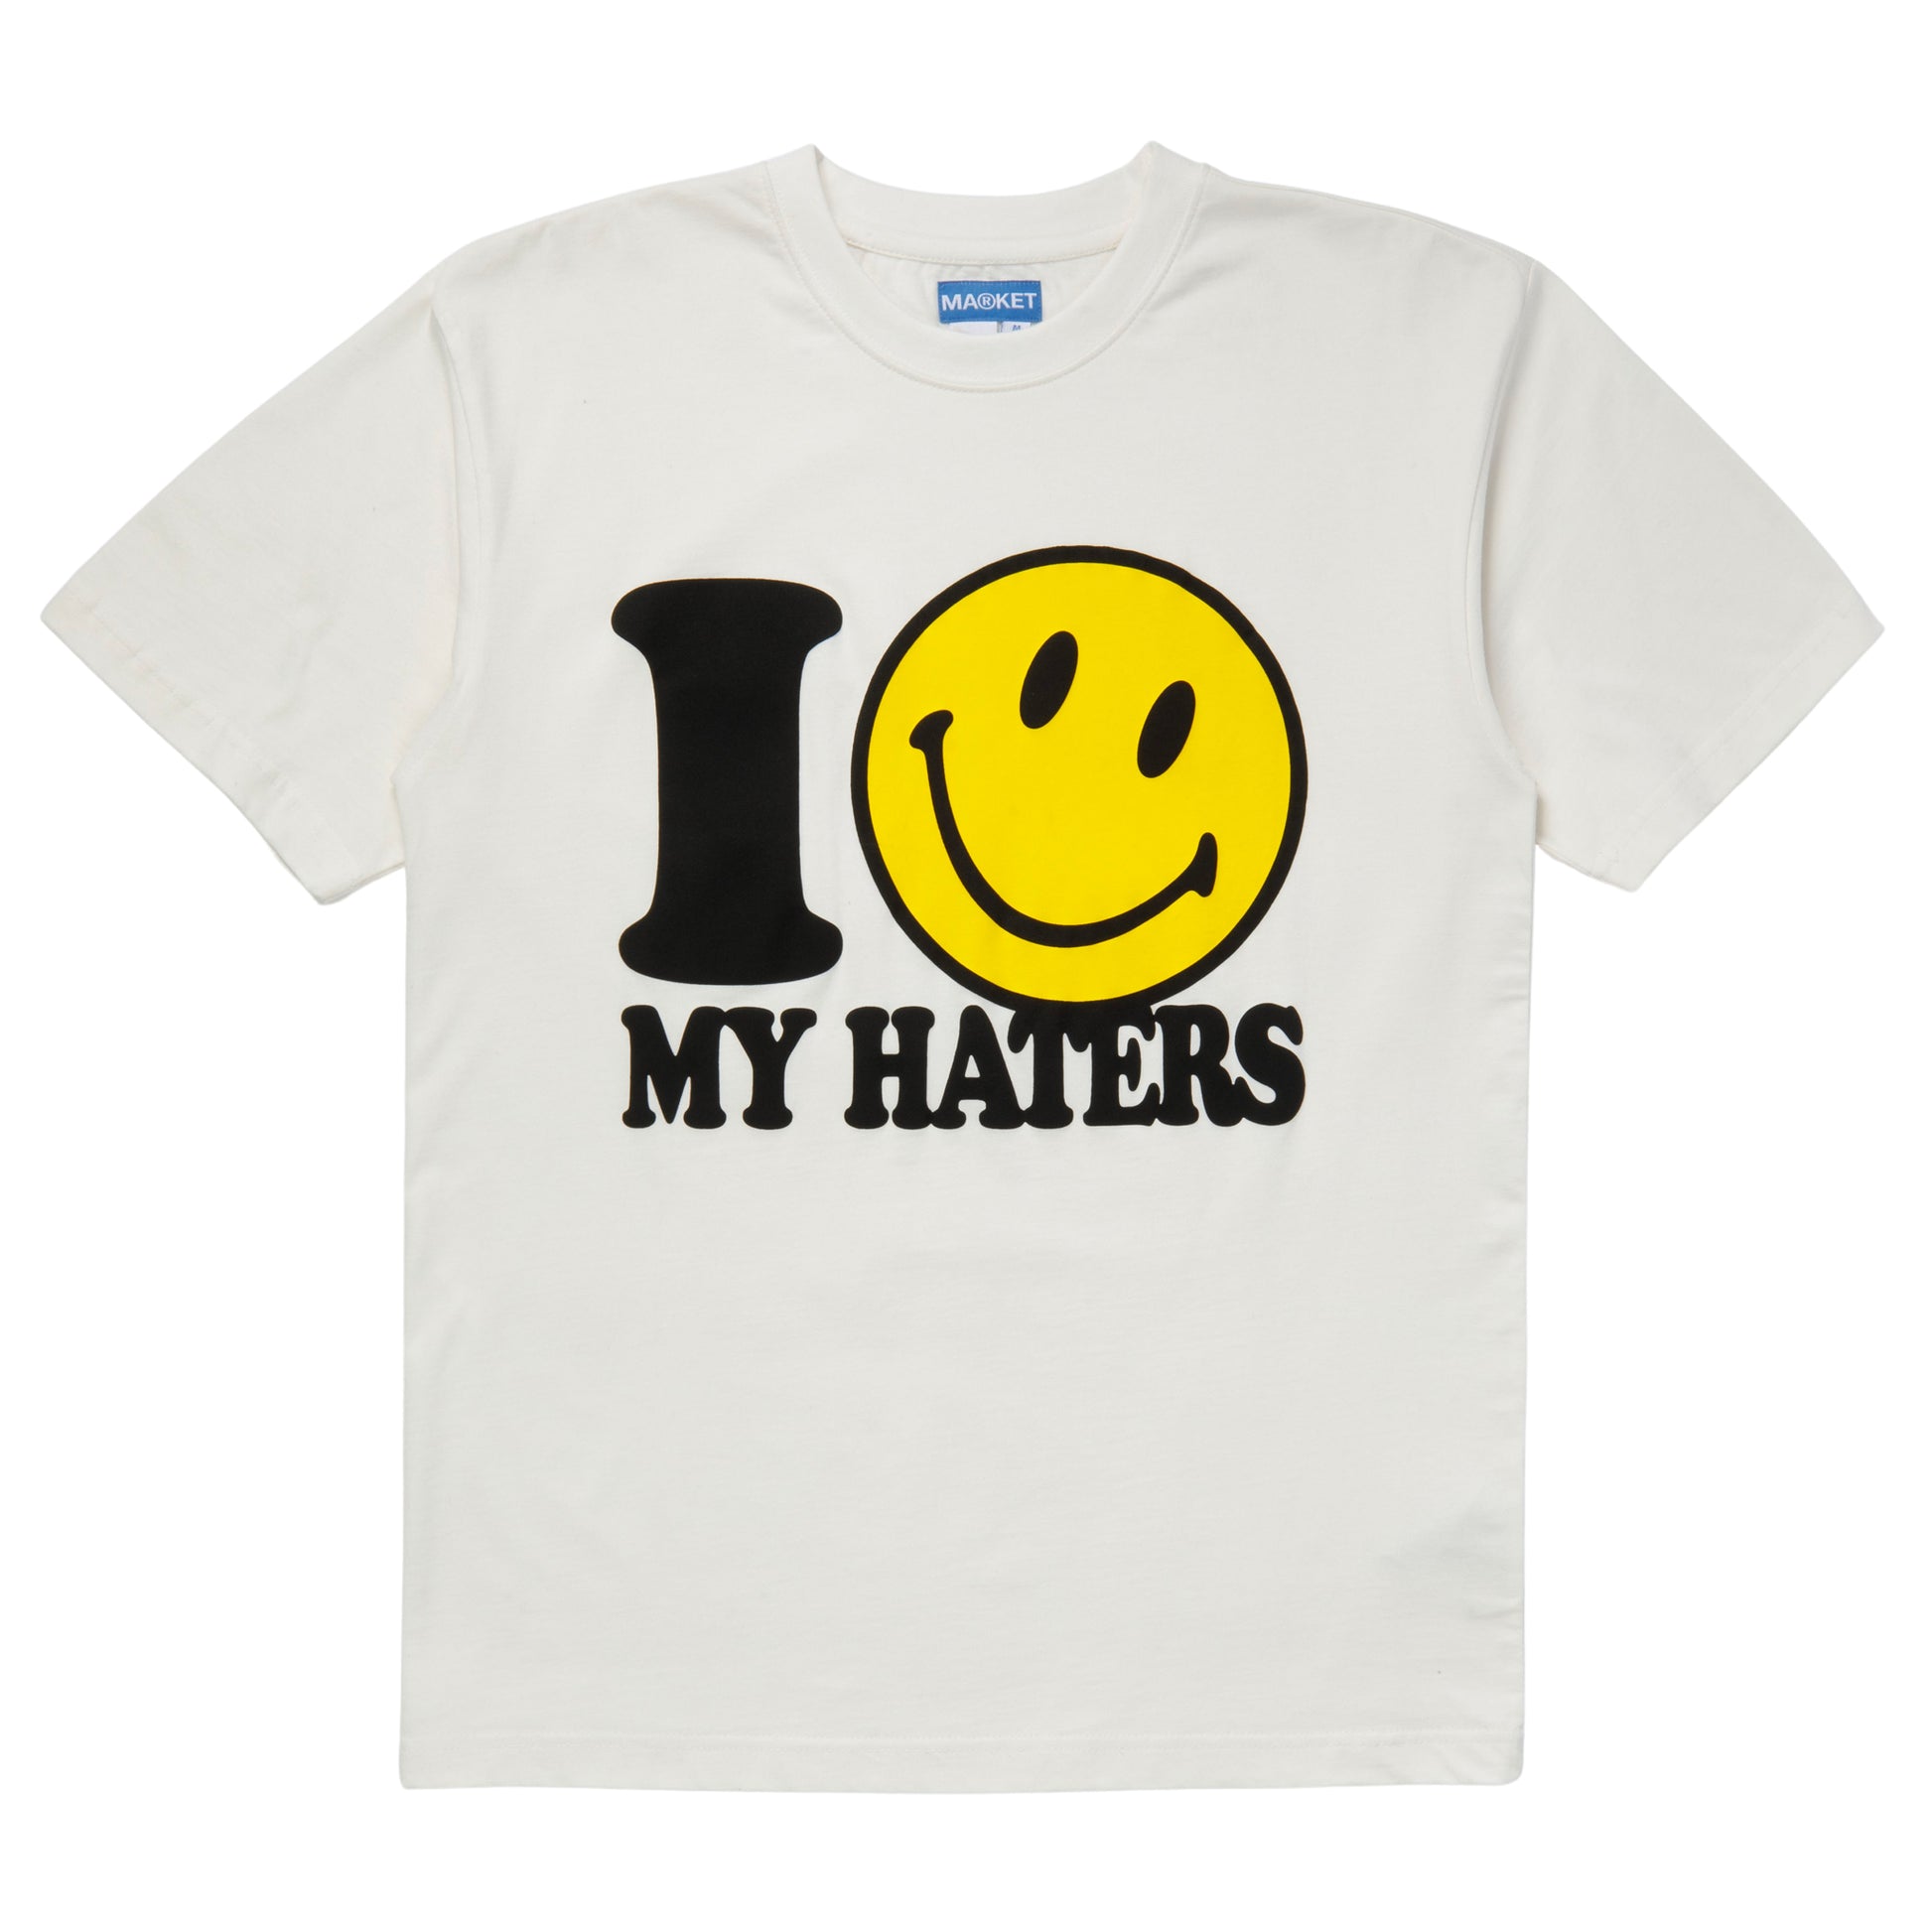 MARKET clothing brand SMILEY HATERS T-SHIRT. Find more graphic tees, hats, hoodies and more at MarketStudios.com. Formally Chinatown Market.